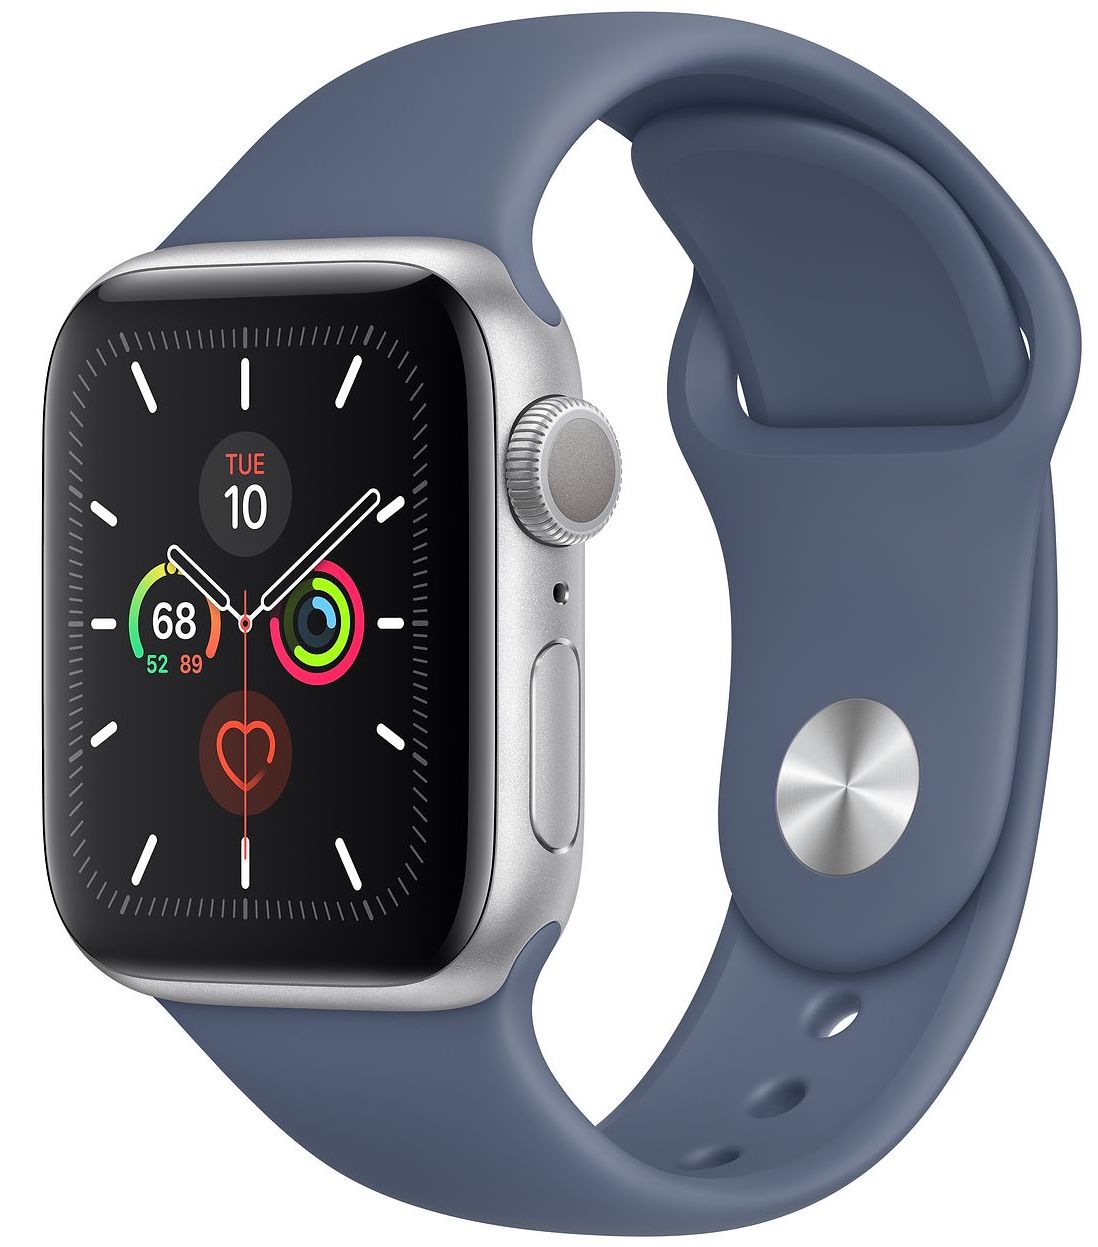 Apple Watch Cellular vs GPS: What's the 